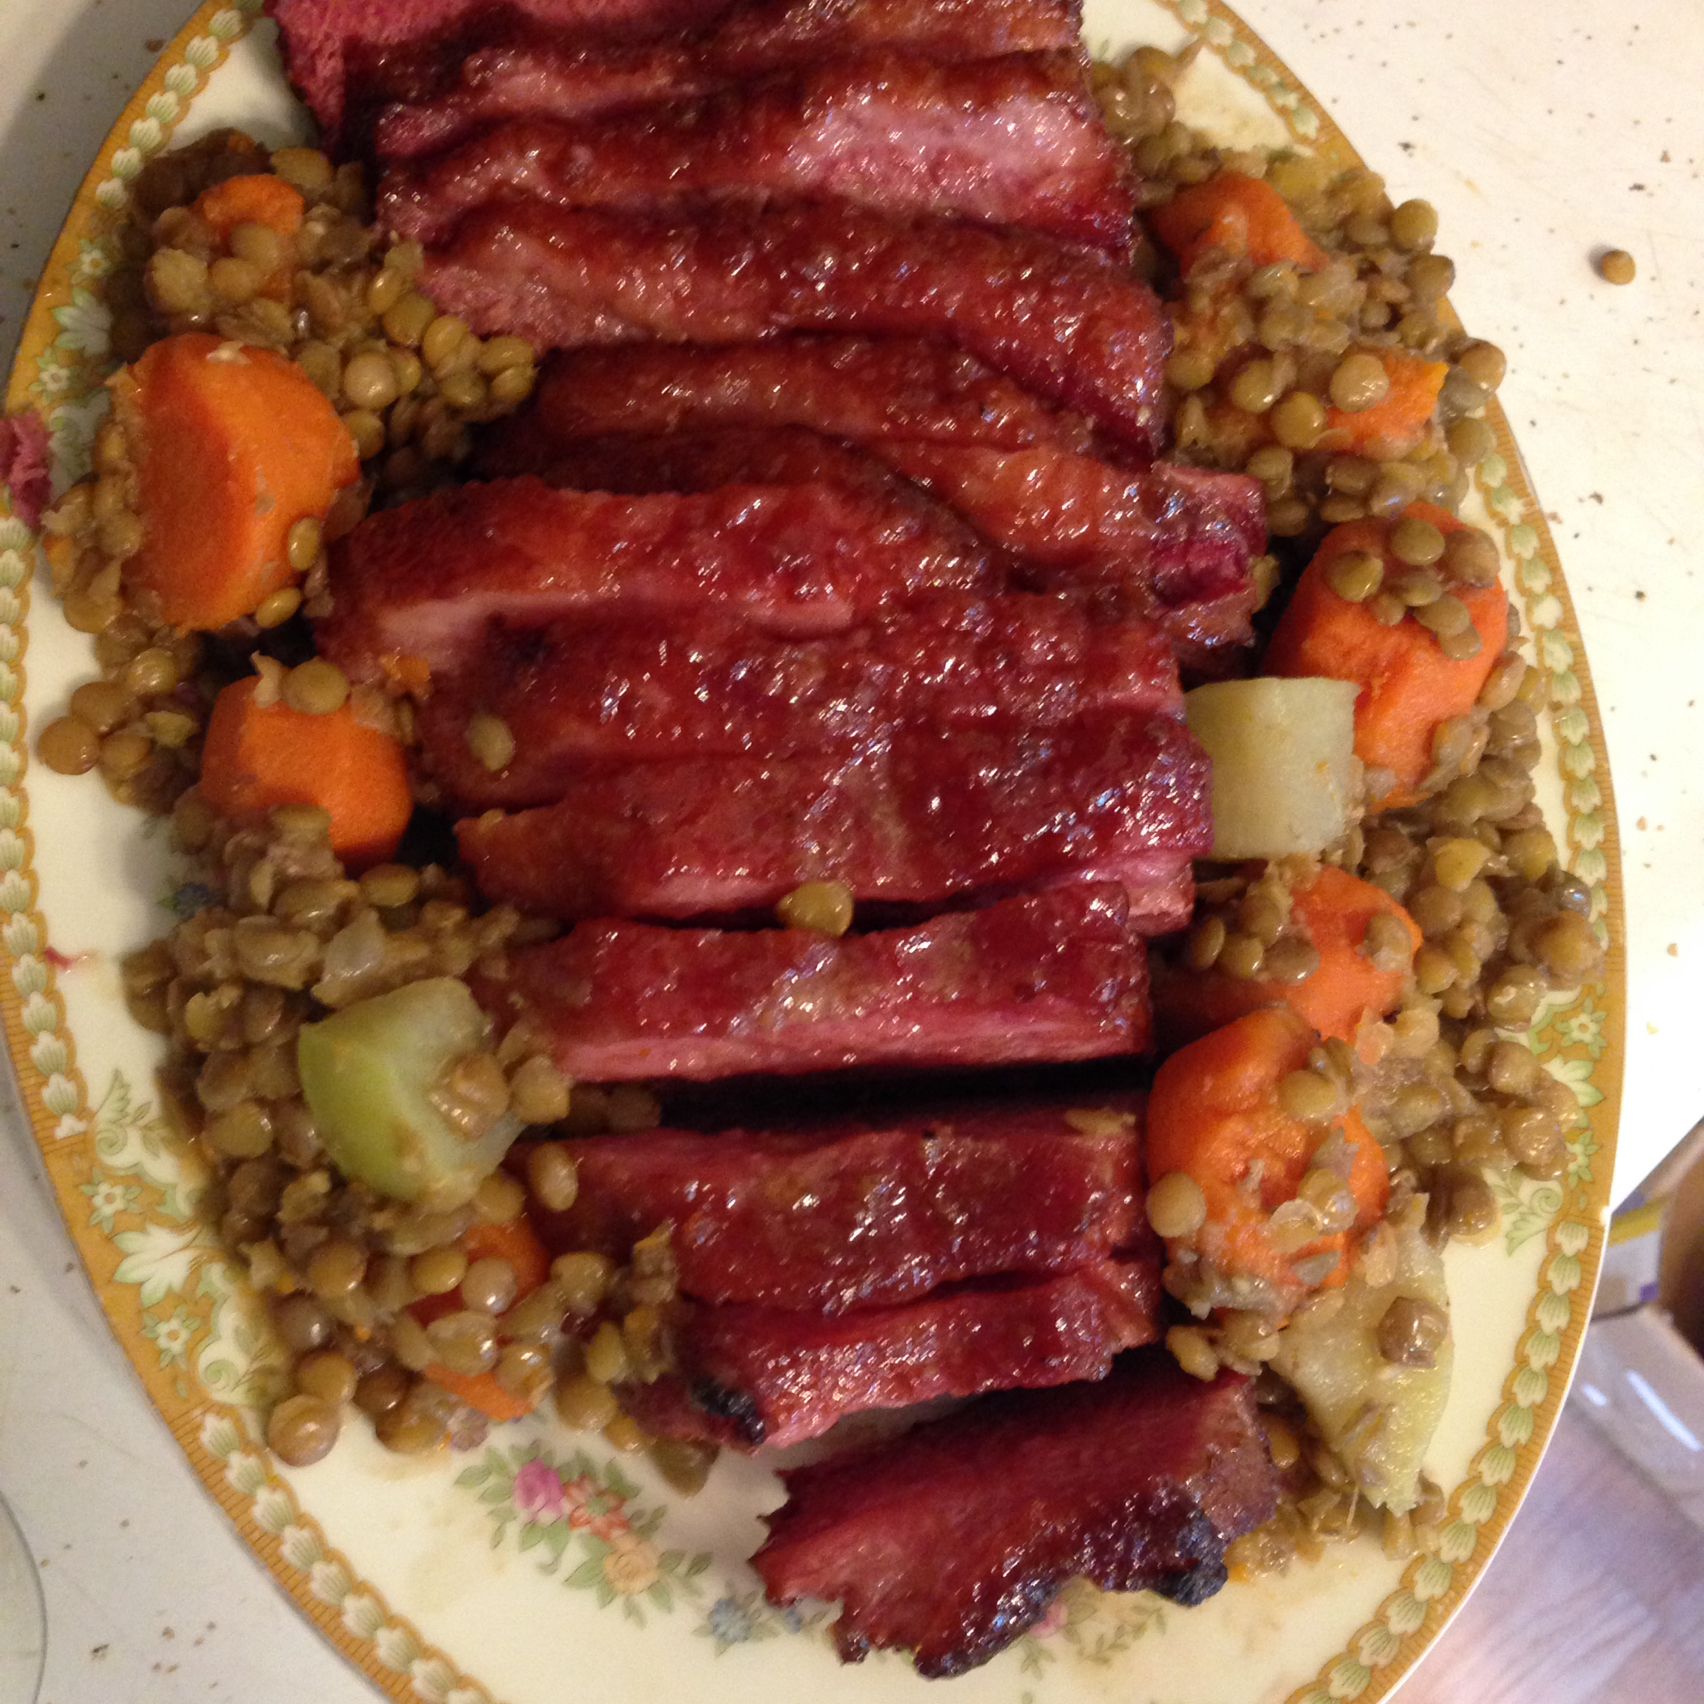 Glazed Corned Beef with Lentils